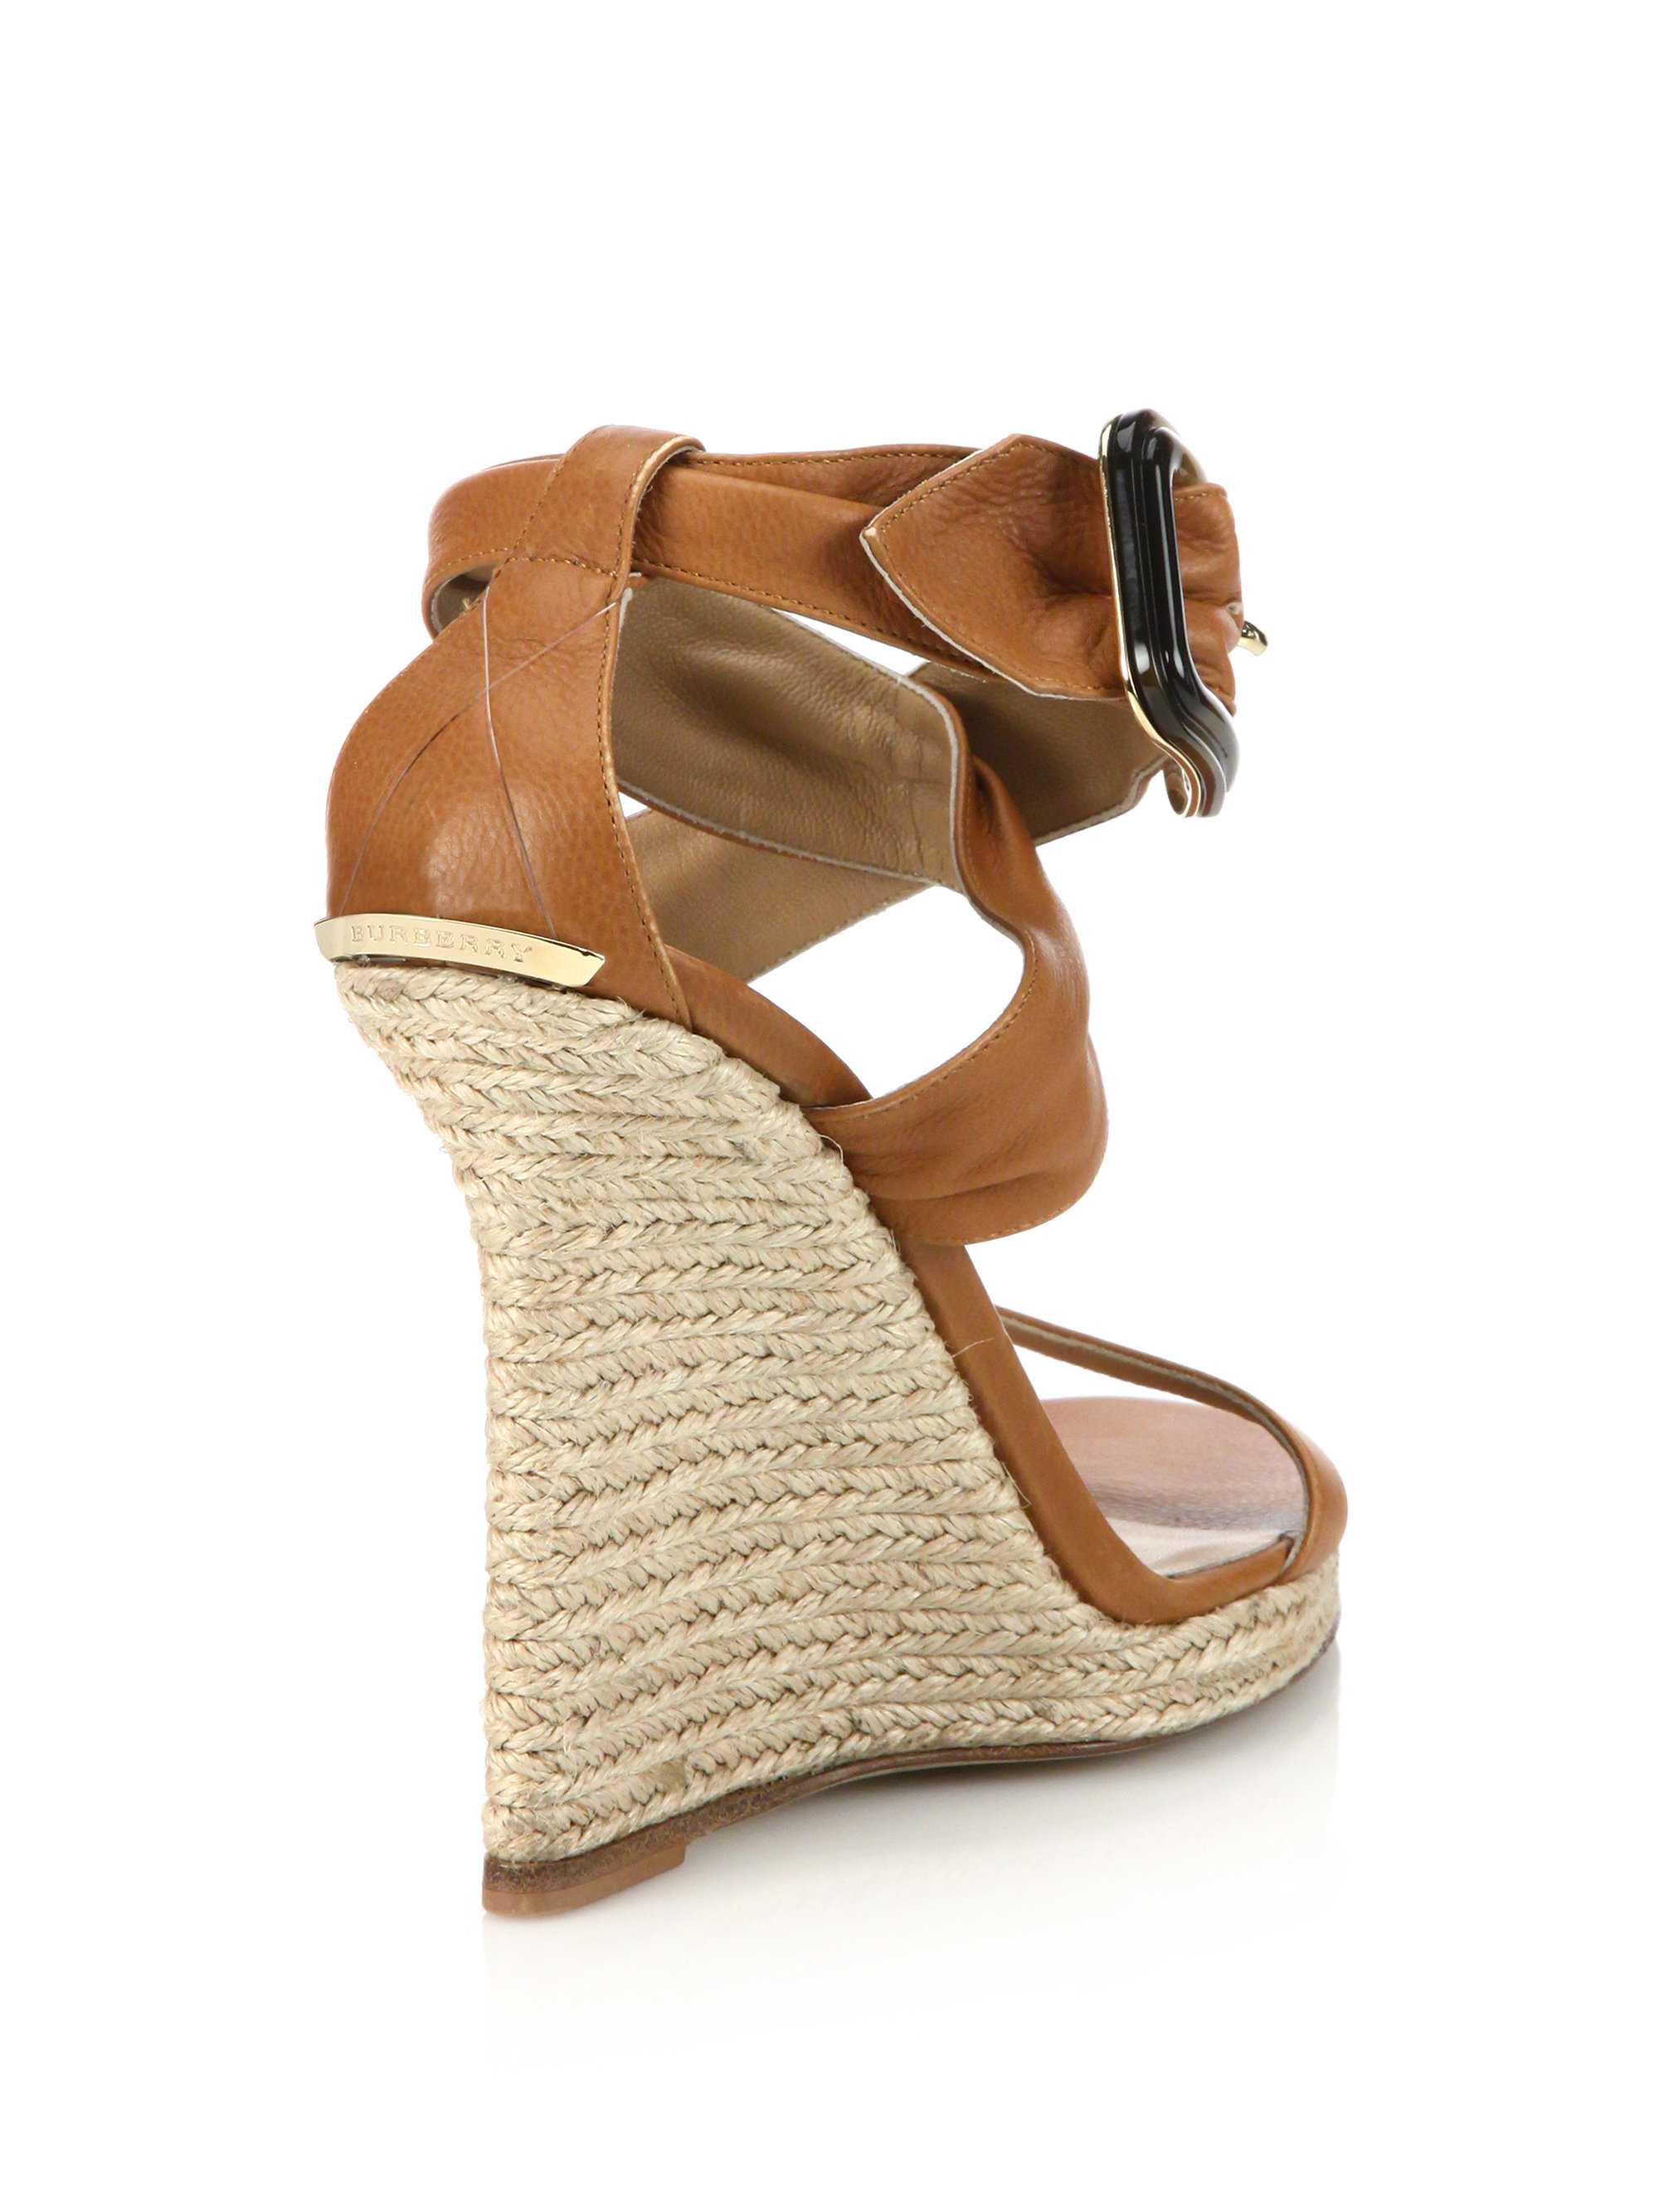 Burberry Catsbrook Leather Espadrille Wedge Sandals in Brown | Lyst